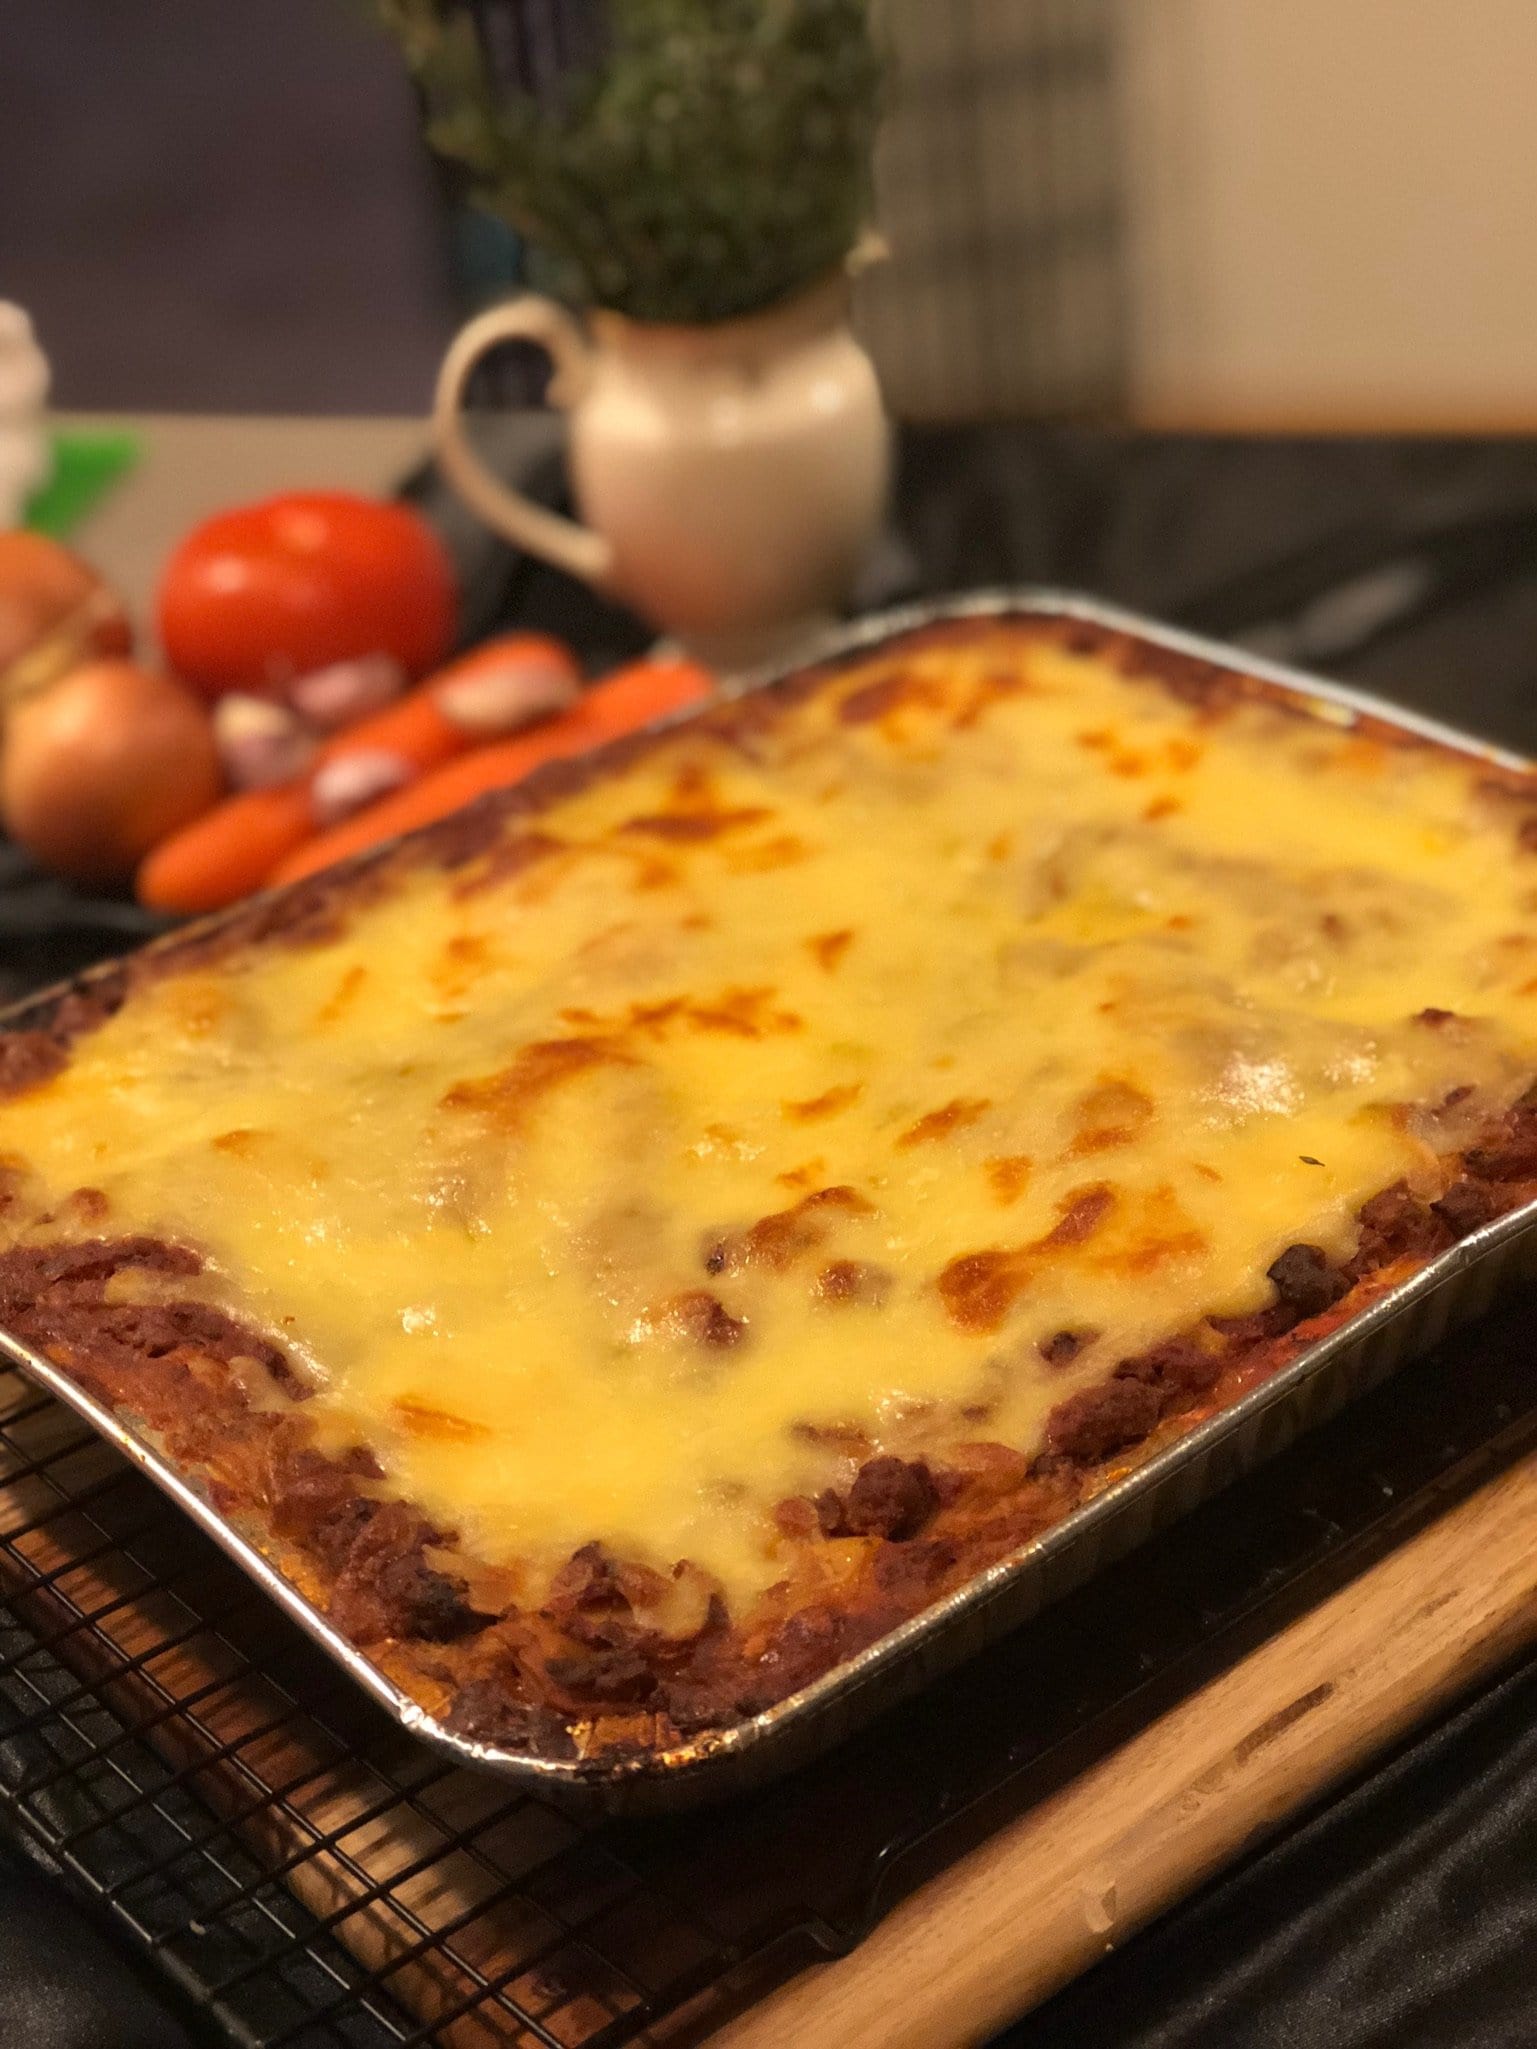 Home cooked lasagne - family size